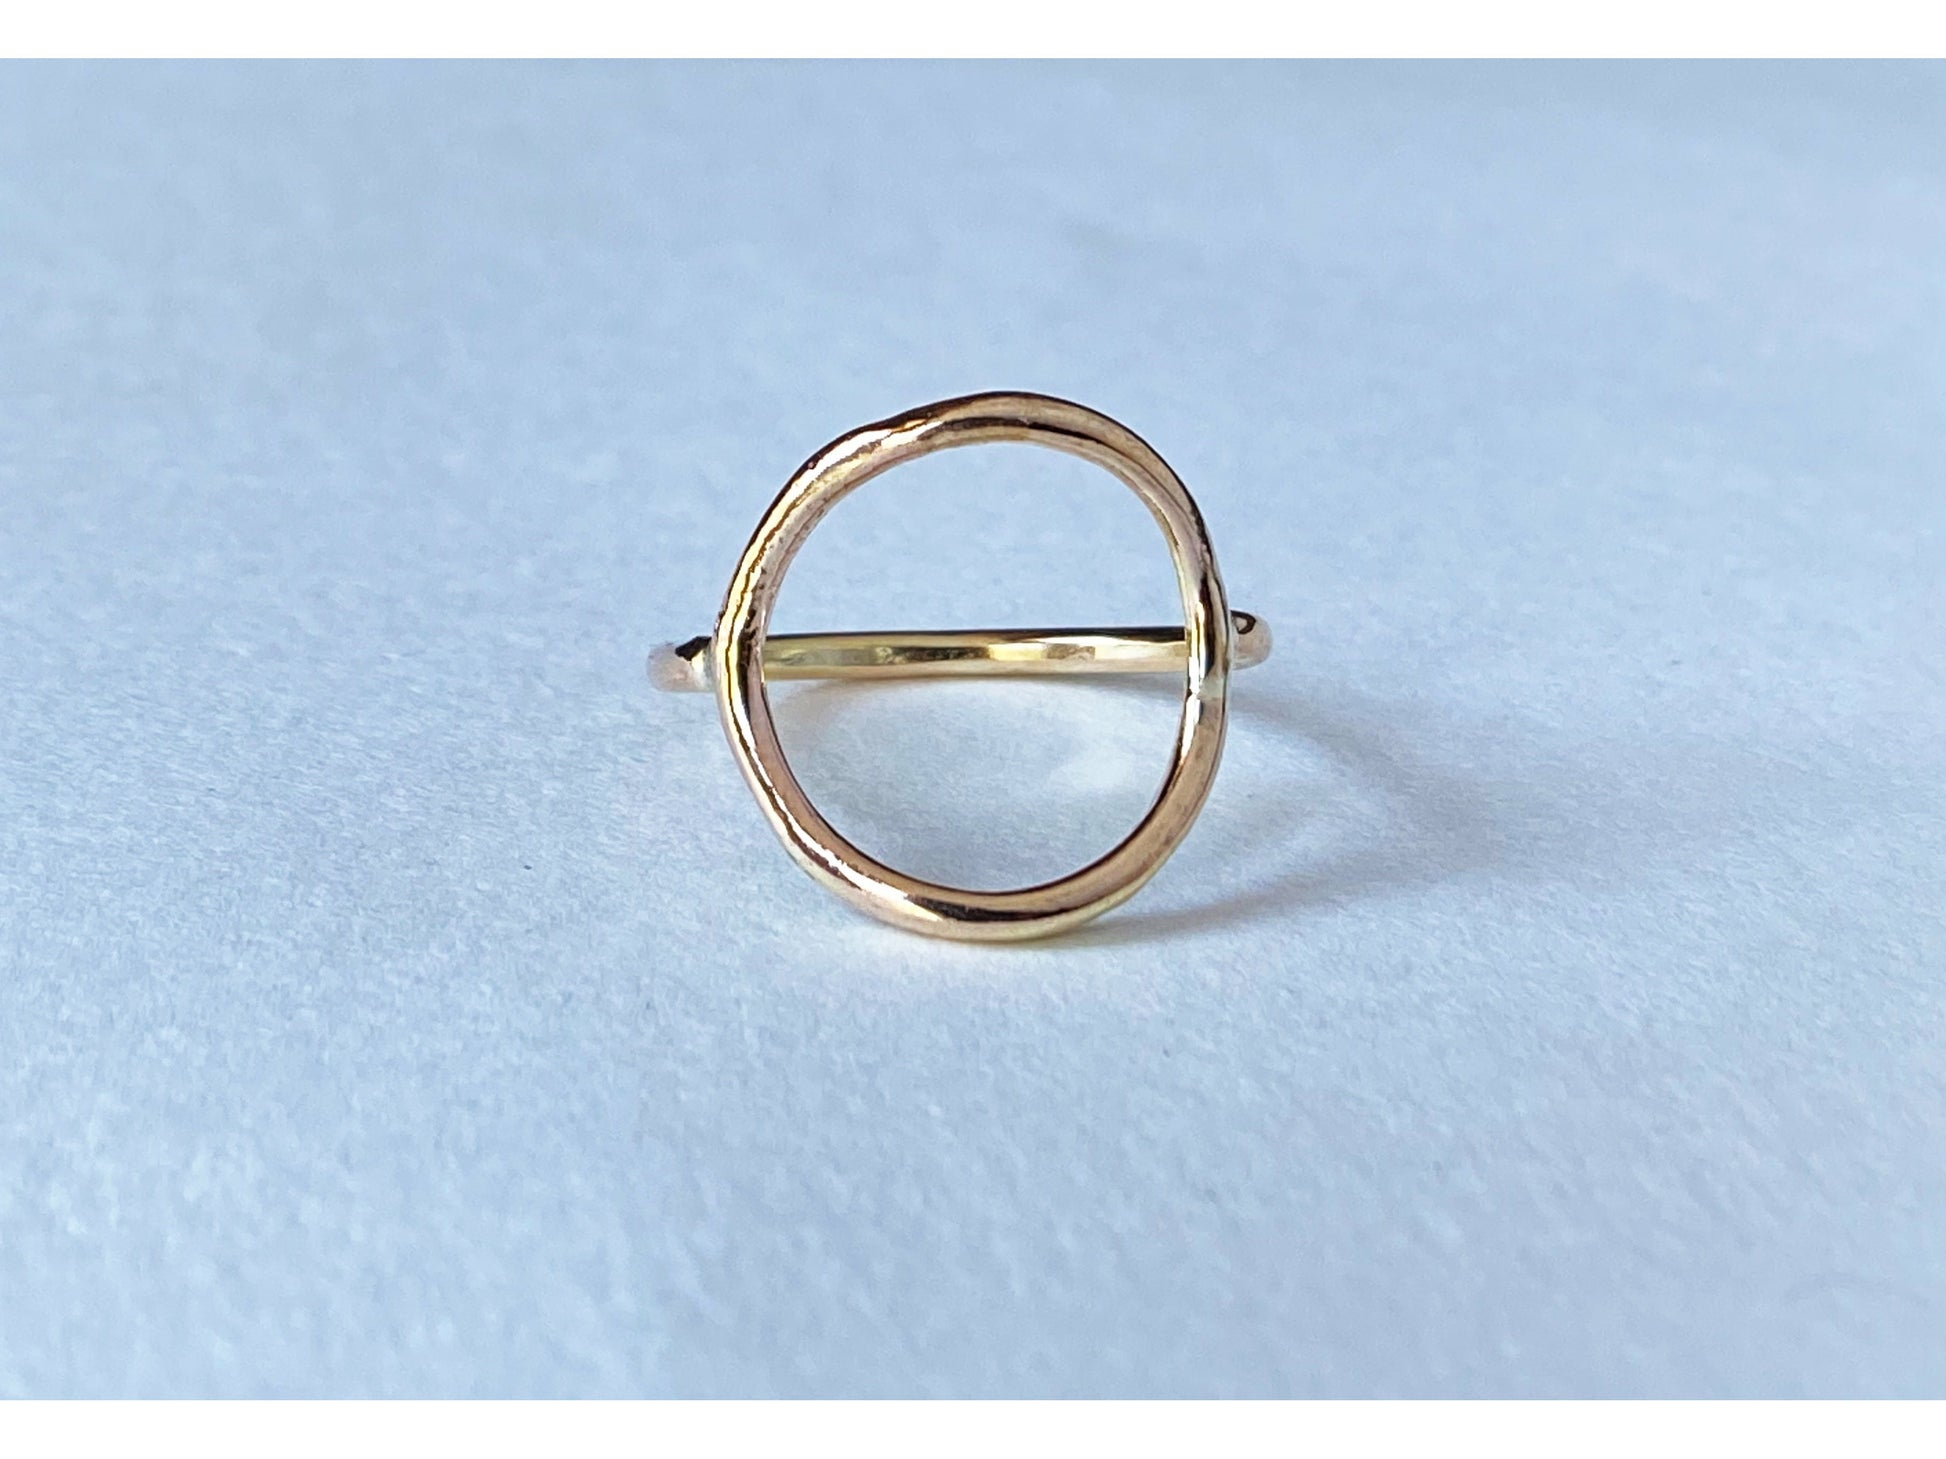 Circle ring in either silver or gold. Band meets the circle on the left and right size, open circle no back.